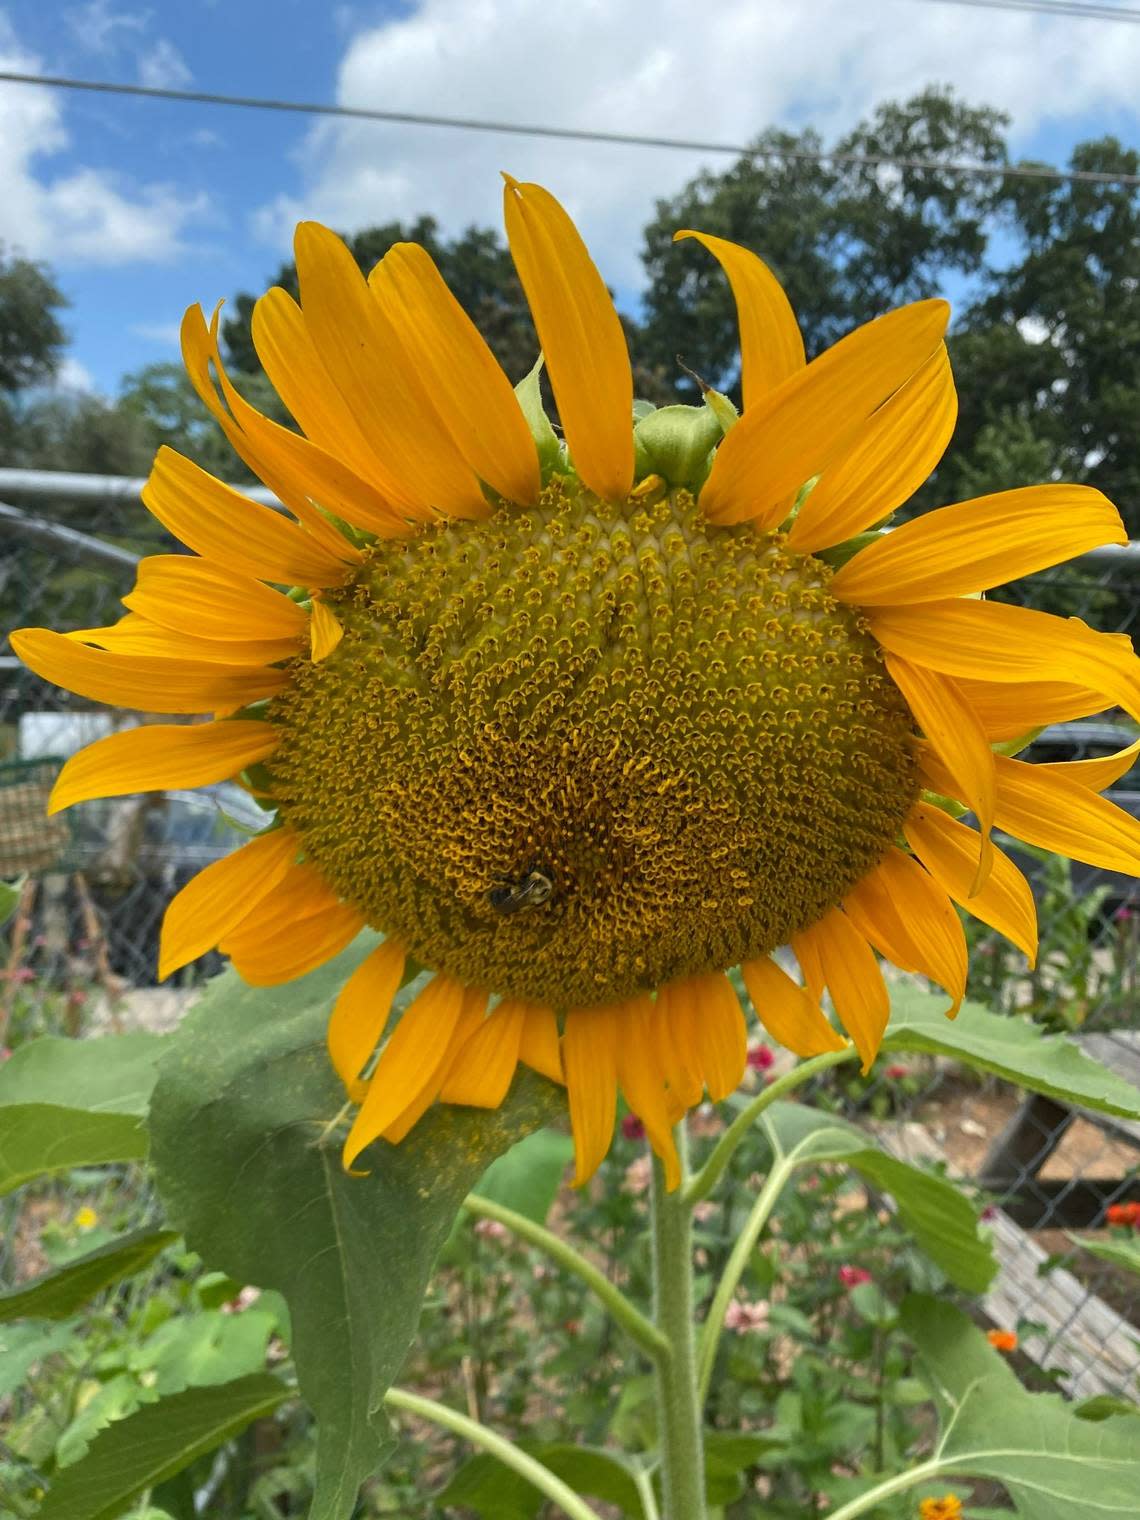 Tall sunflowers and zinnias planted by volunteers from Berkeley Cafe brighten a lingering construction site in downtown Raleigh.